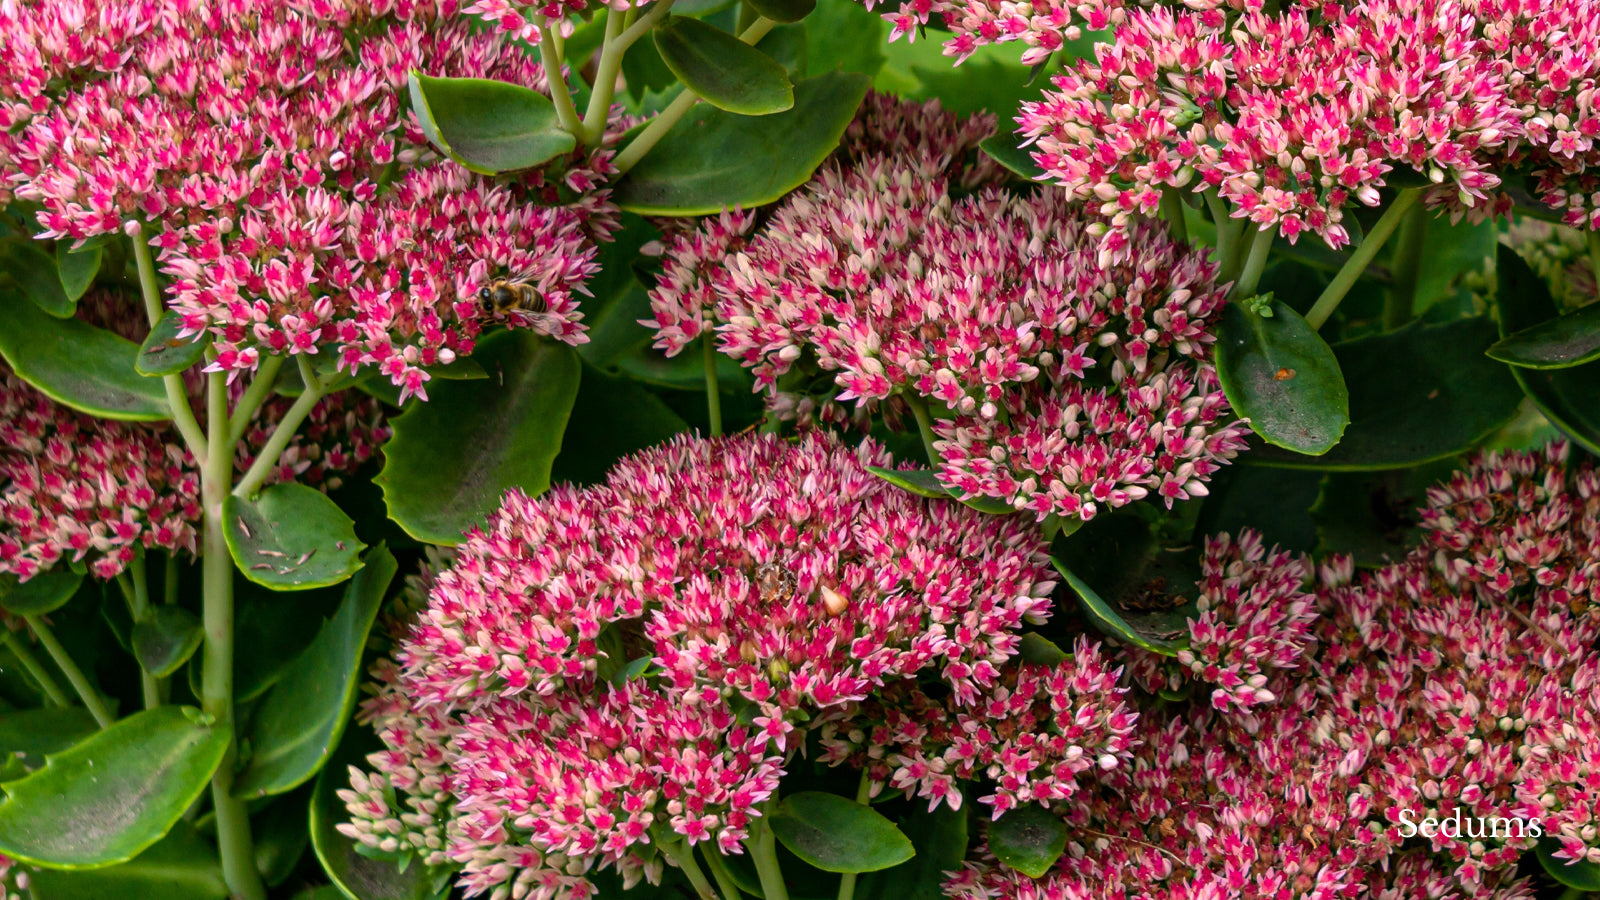 Sedums with bright and soft pink petals